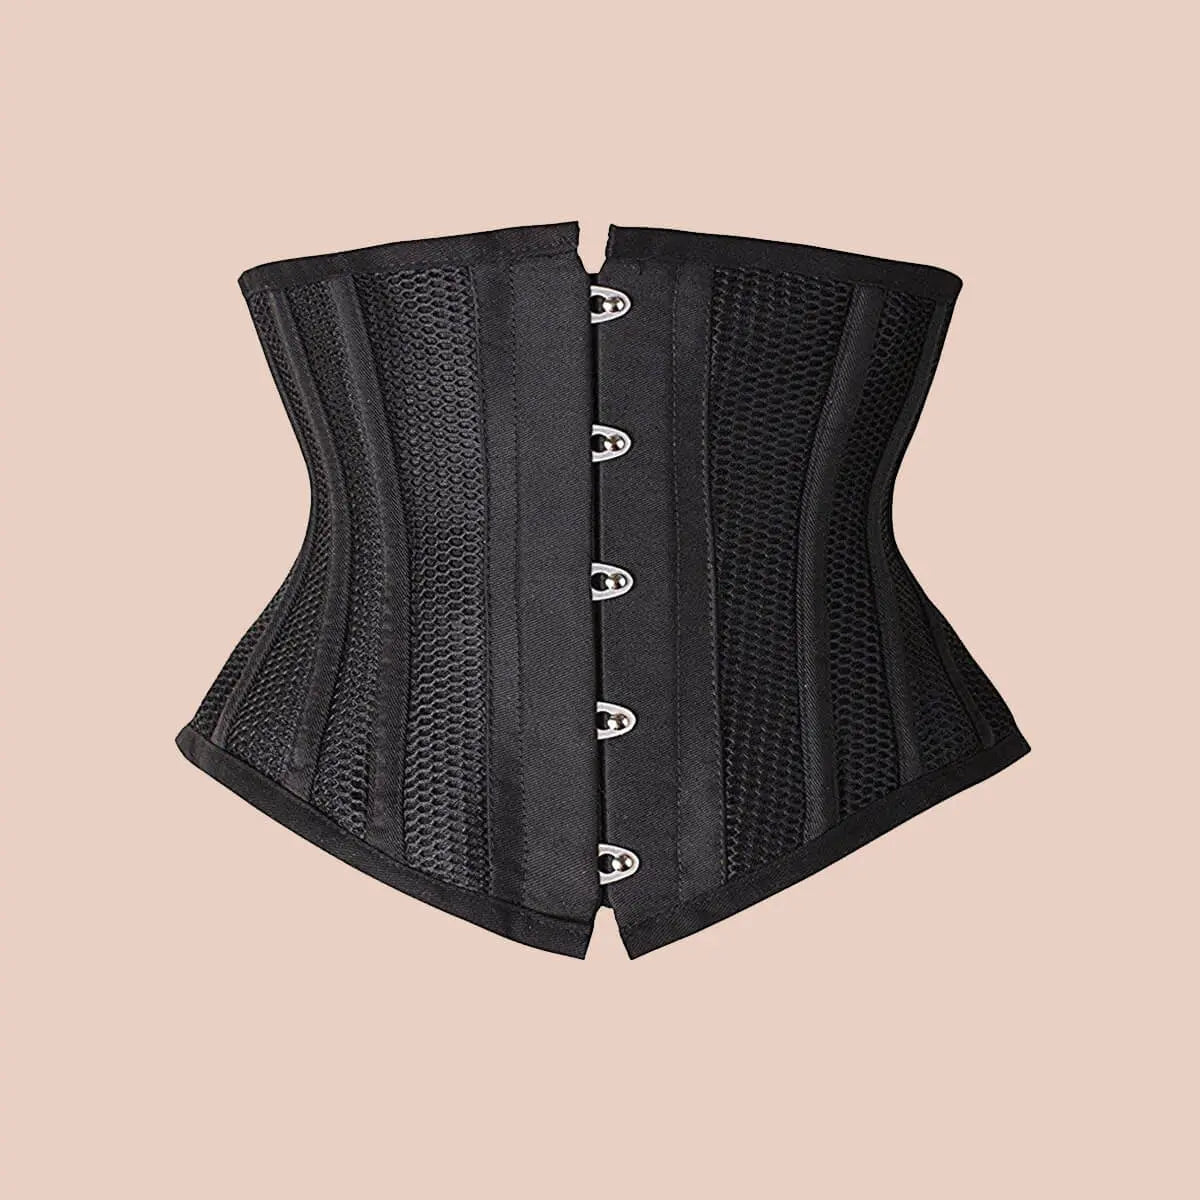 22cm Short Waist Trimmer Belt With 26 Steel Bones For Small Waist Training  And Tummy Control